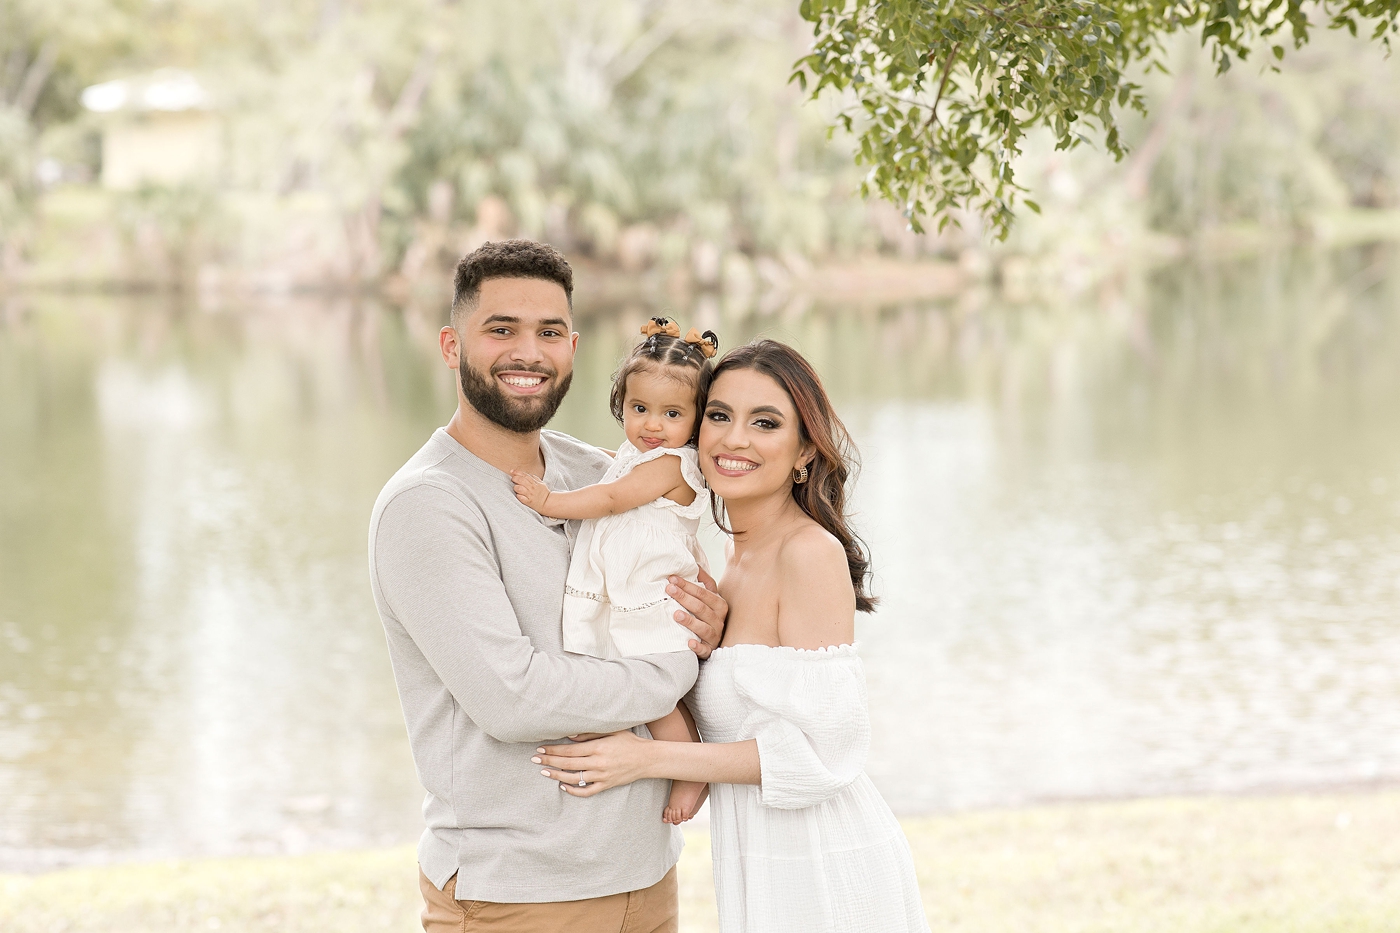 Beautiful family of three pose for a portrait during baby photography miami session. Photo by Ivanna Vidal Photography.